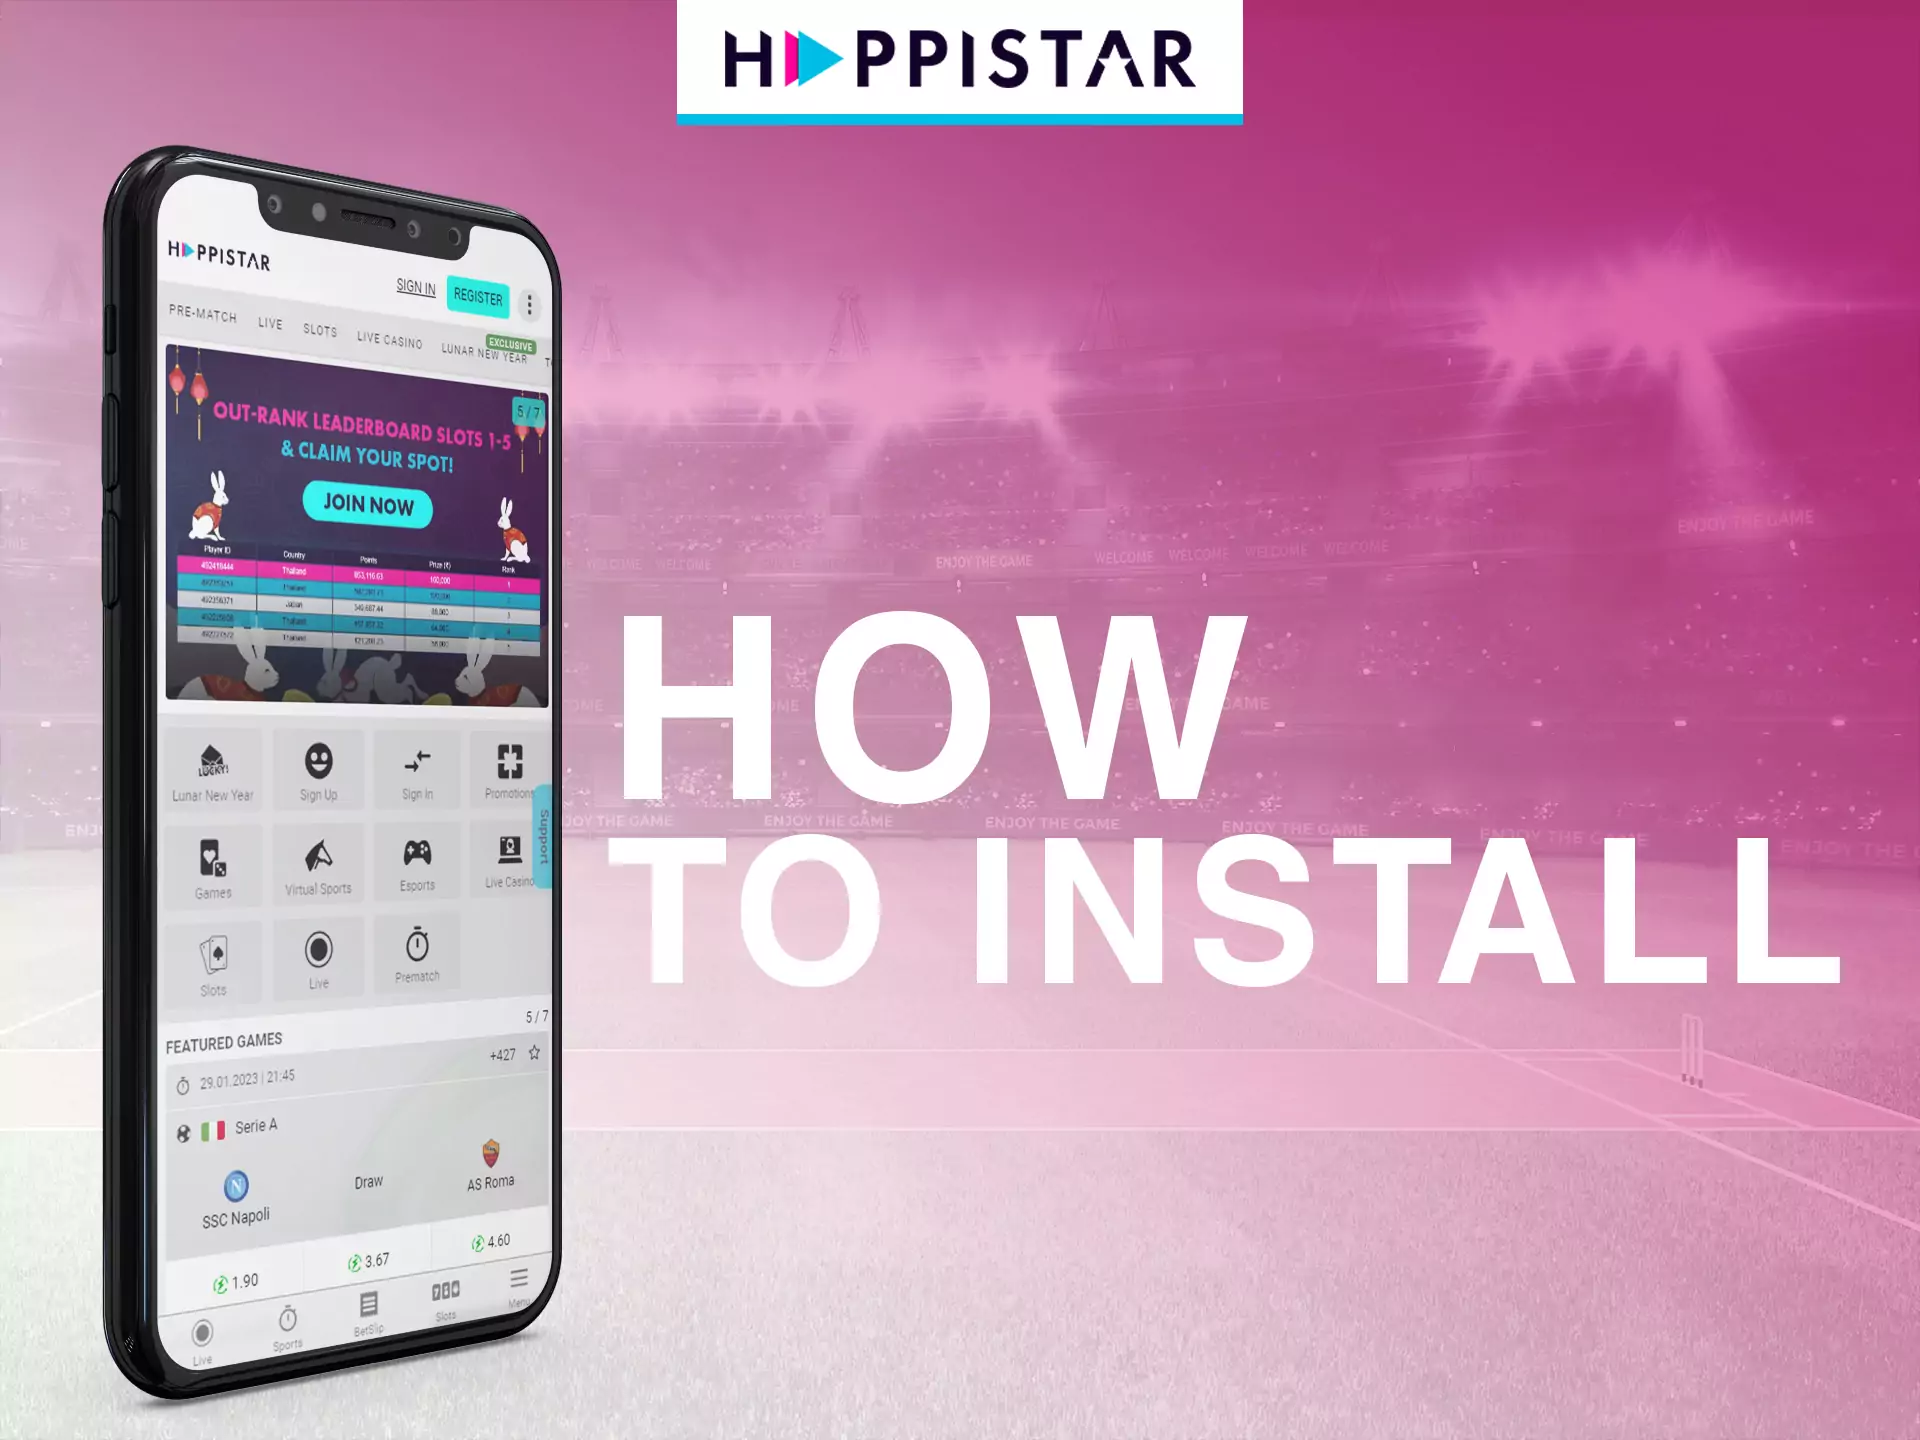 There is no need to install Happistar on your device since there is only a website version is available.